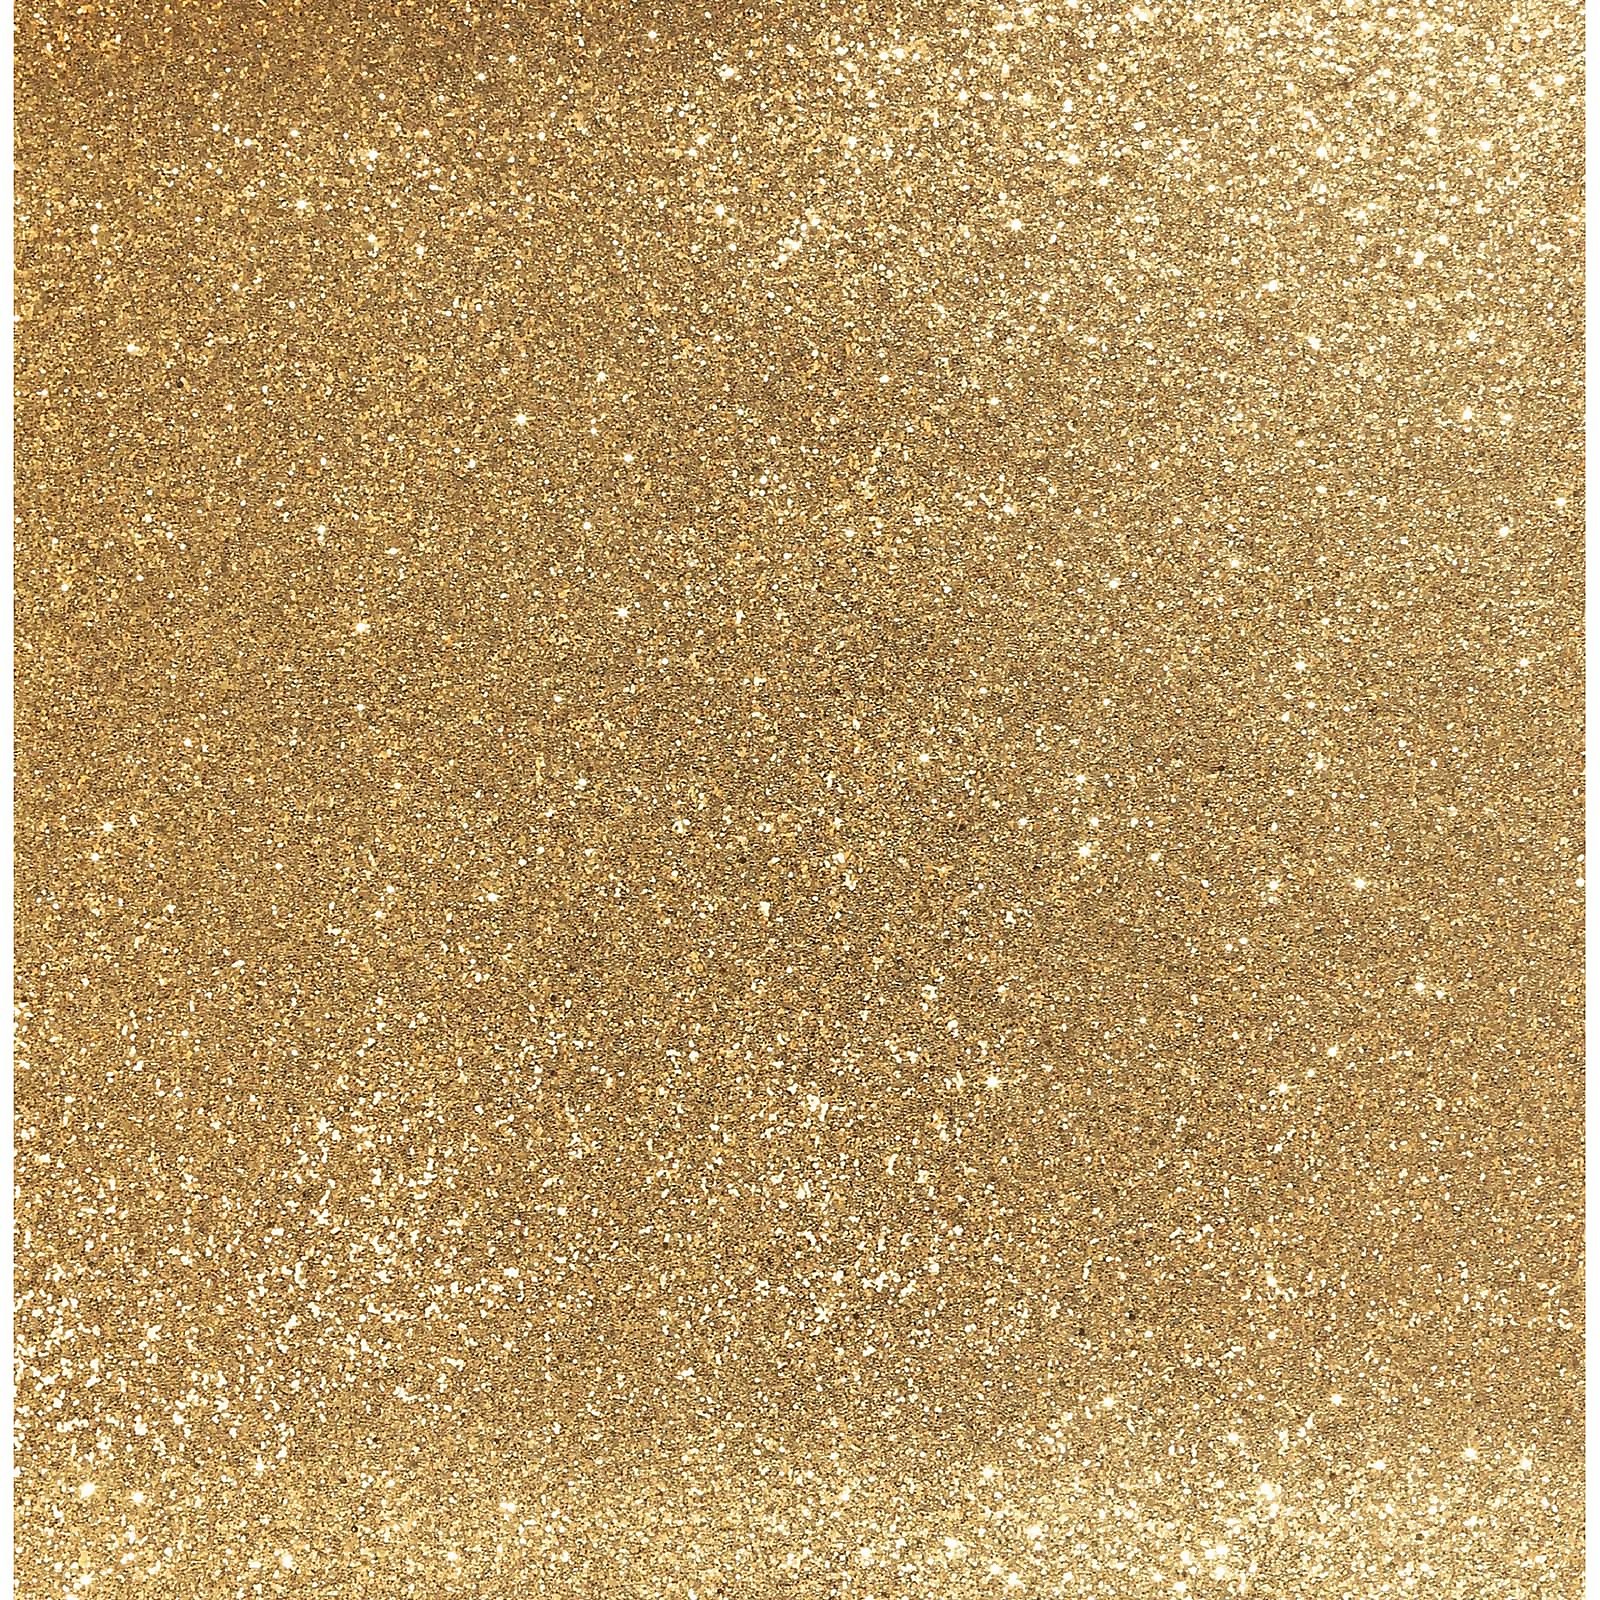 Photo of Arthouse Sequin Sparkle Gold Wallpaper A4 Sample